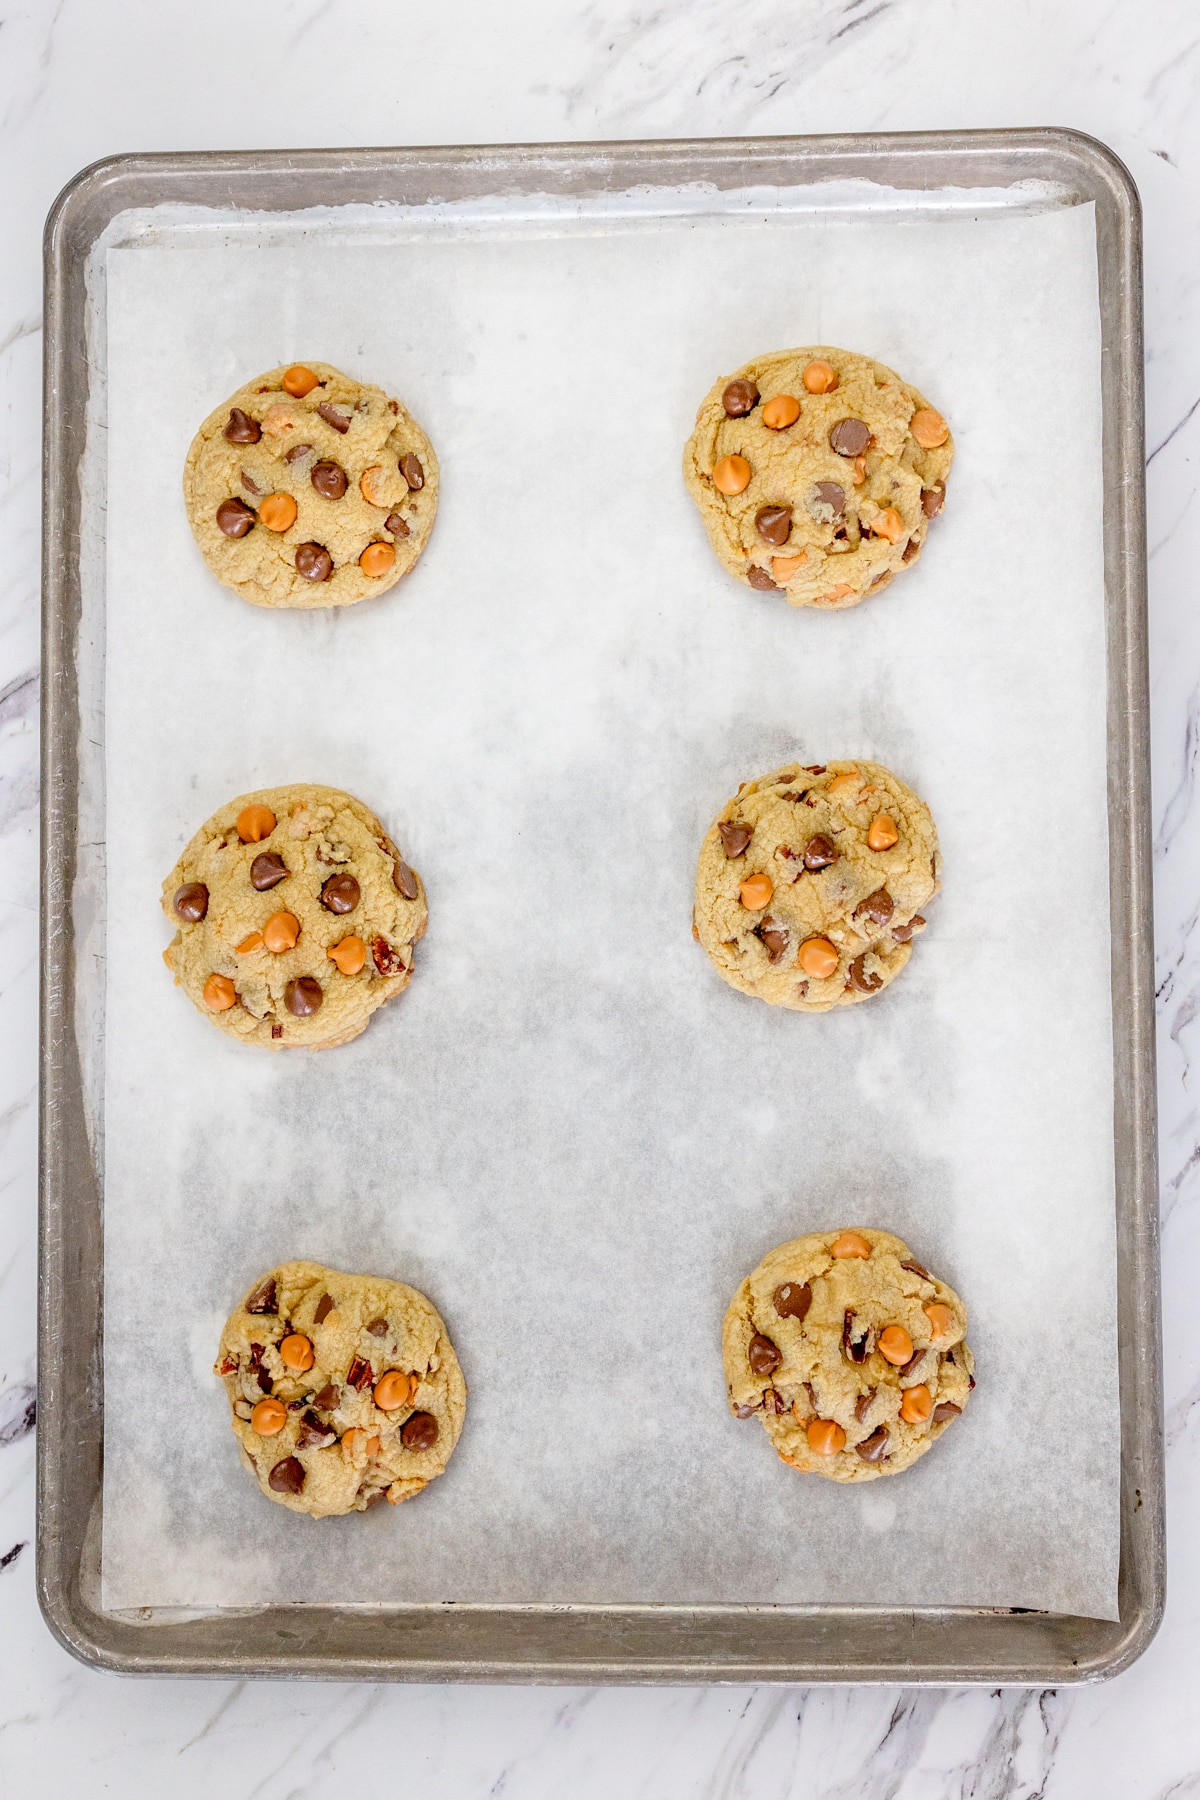 Top view of Butterscotch Chocolate Chip Cookies on a baking tray lined with parchment paper.